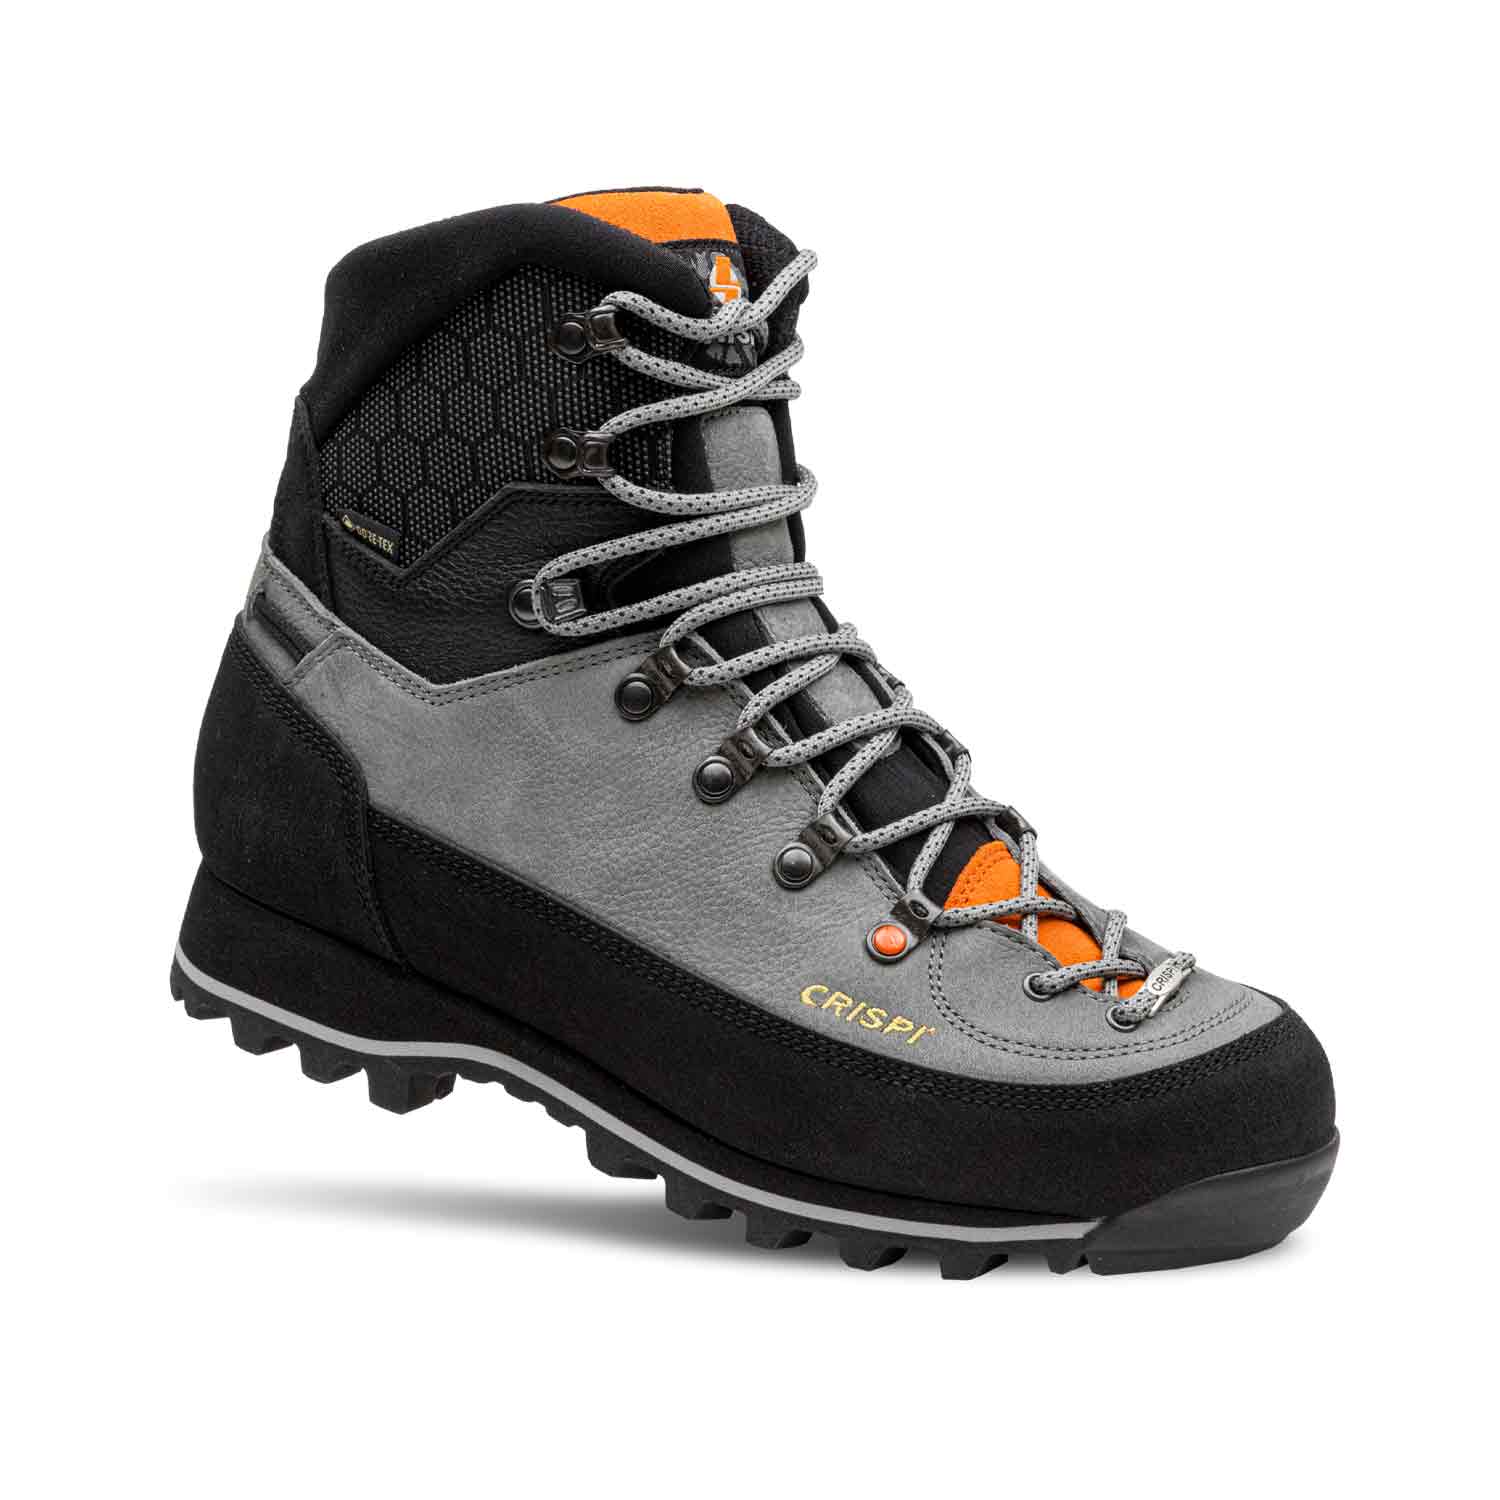 Crispi Lapponia III GTX Non-Insulated Boots - Wide (EE)